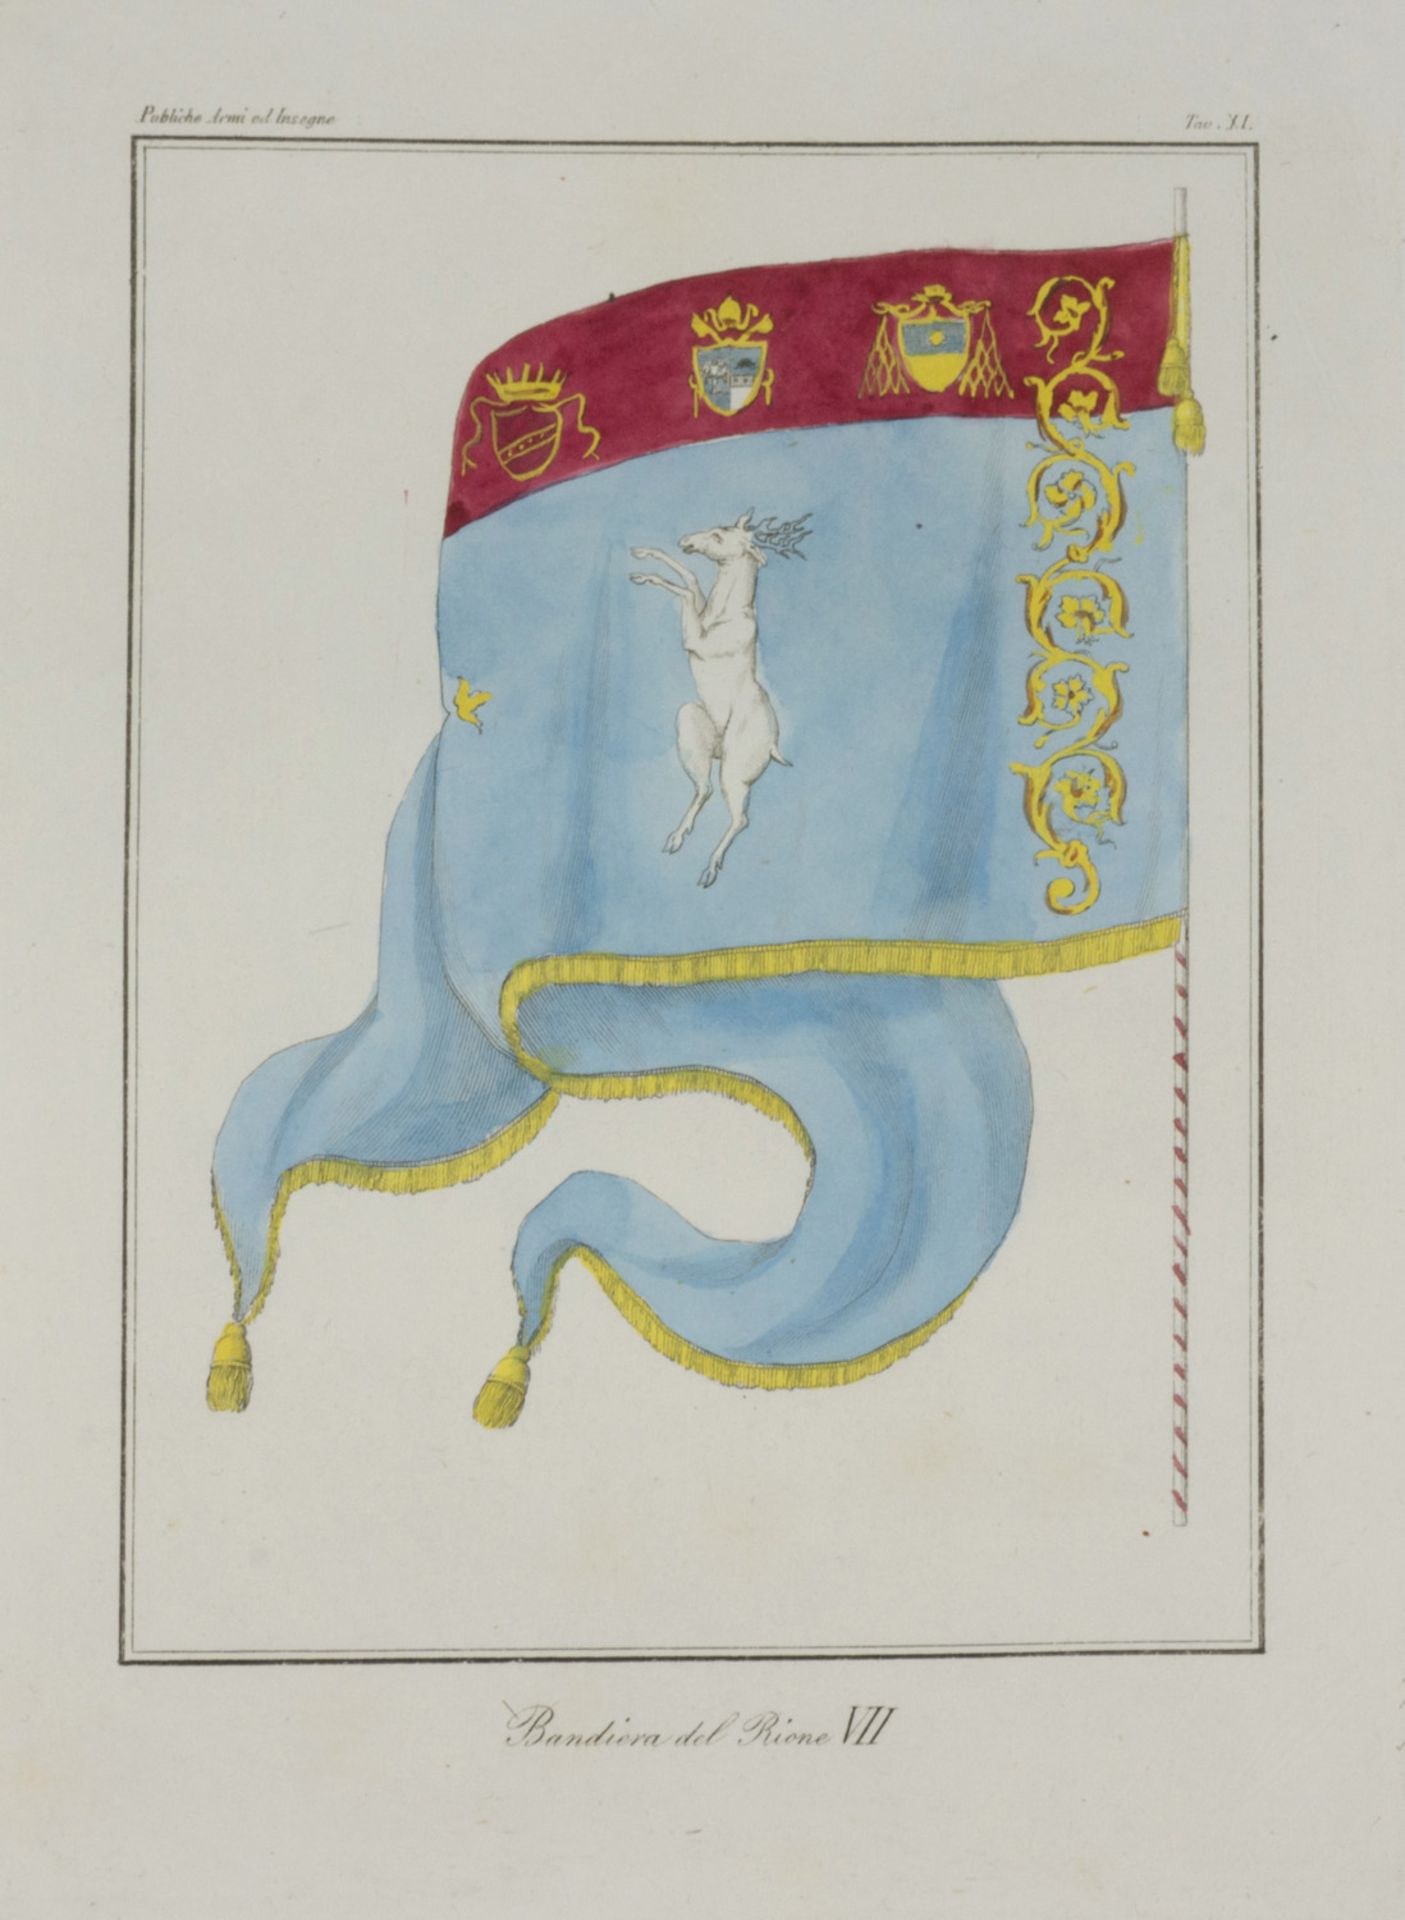 FIFTEEN ENGRAVINGS OF HERALDIC COAT OF ARMS 19TH CENTURY - Image 3 of 4